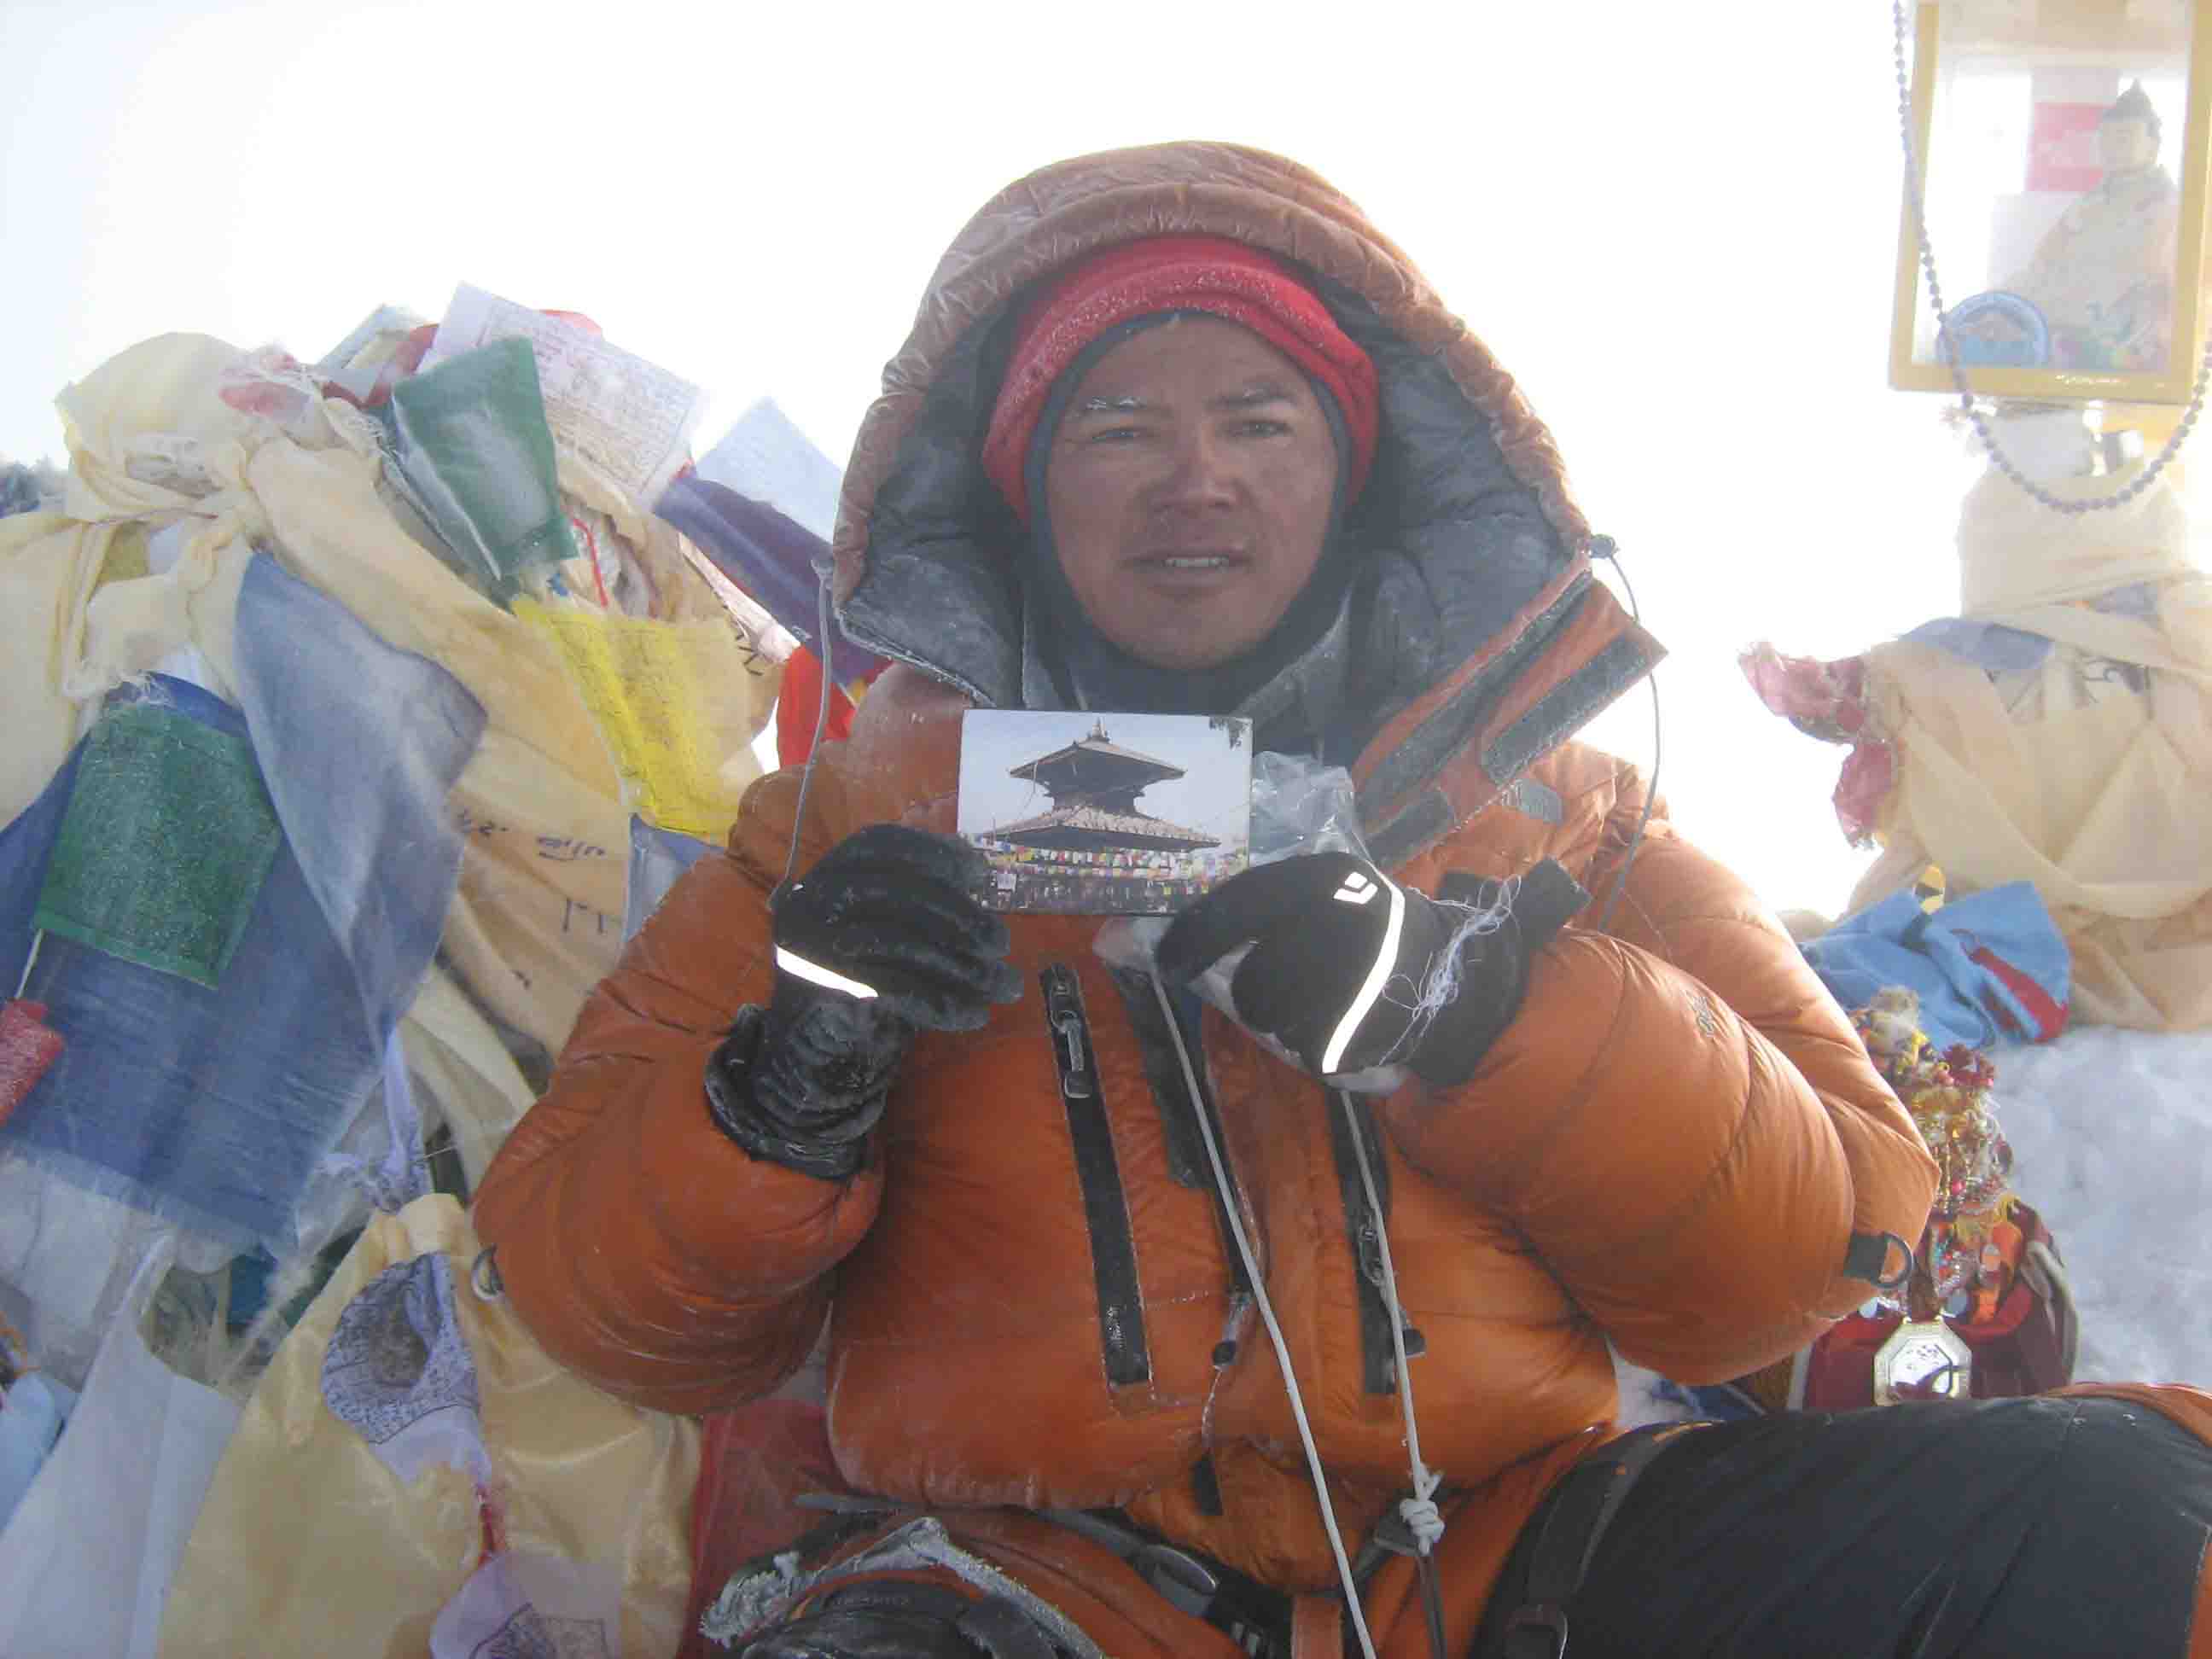 Mt.Everest Expedition (8,848.86m)